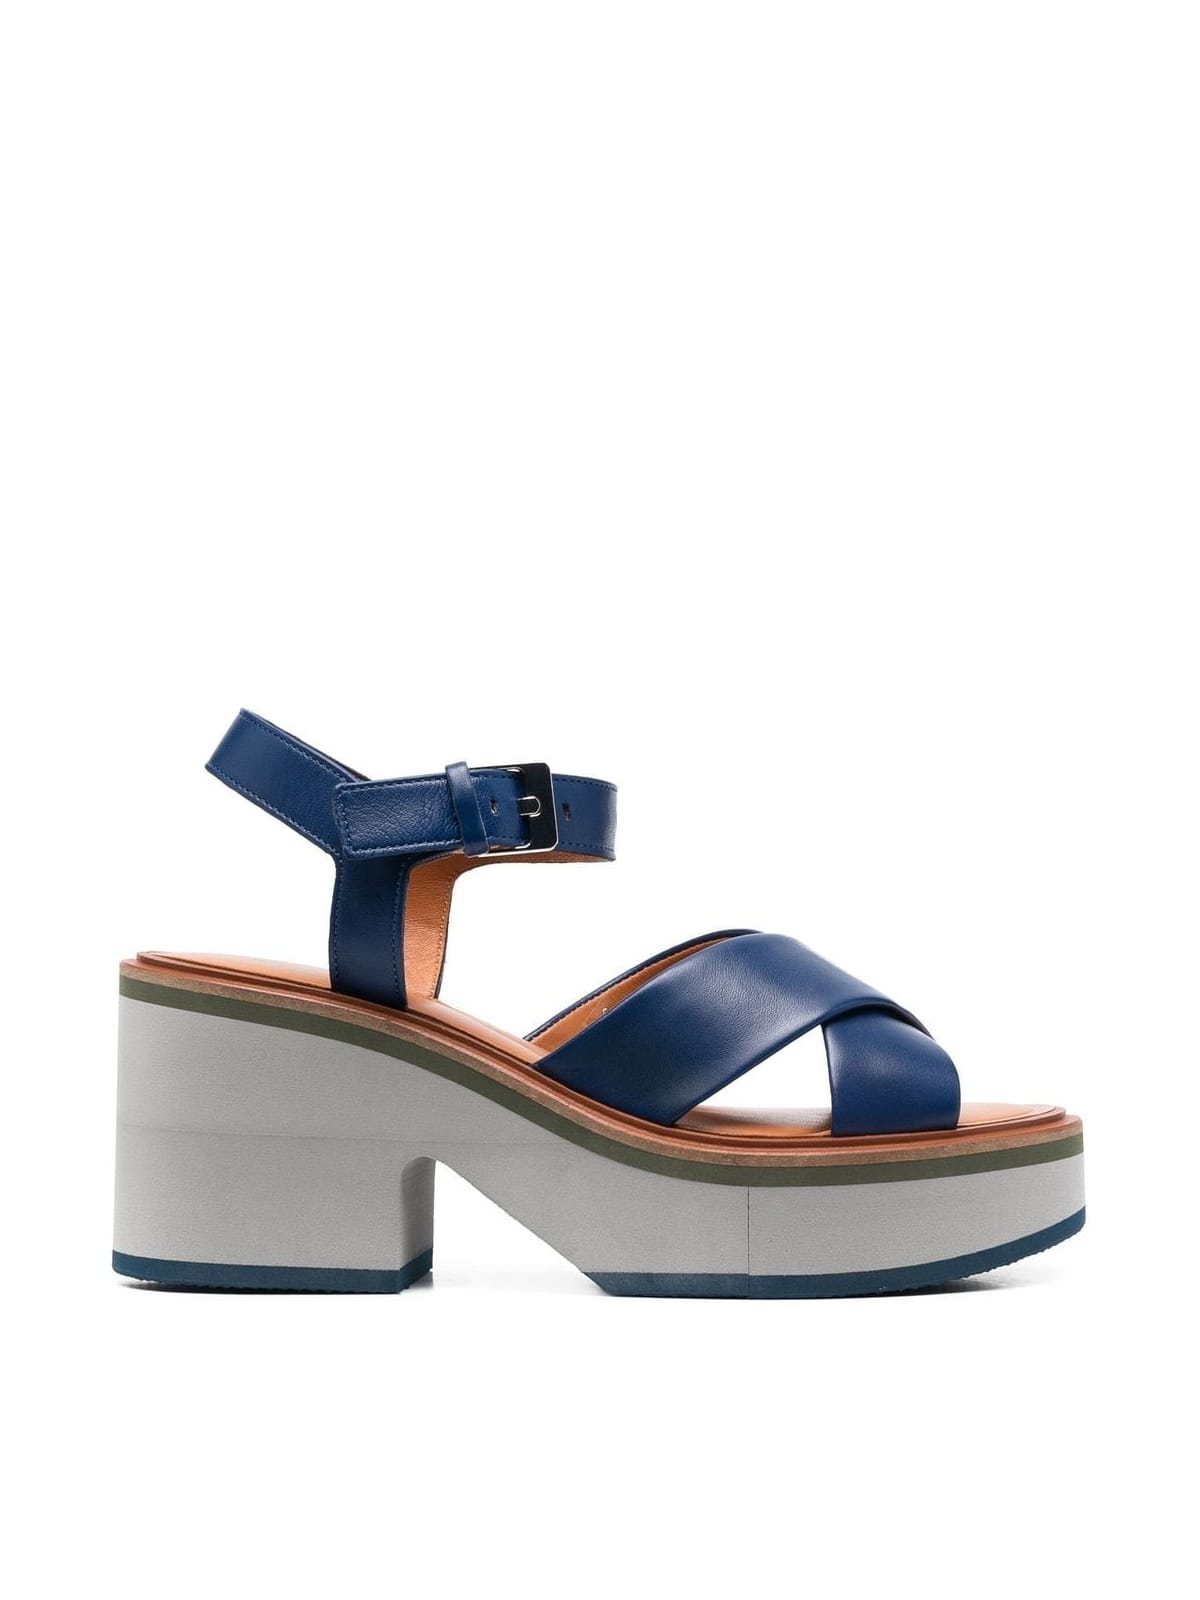 CLERGERIE CHARLINE9 CRISS CROSS SANDAL WITH CLOSURE AT THE ANKLES